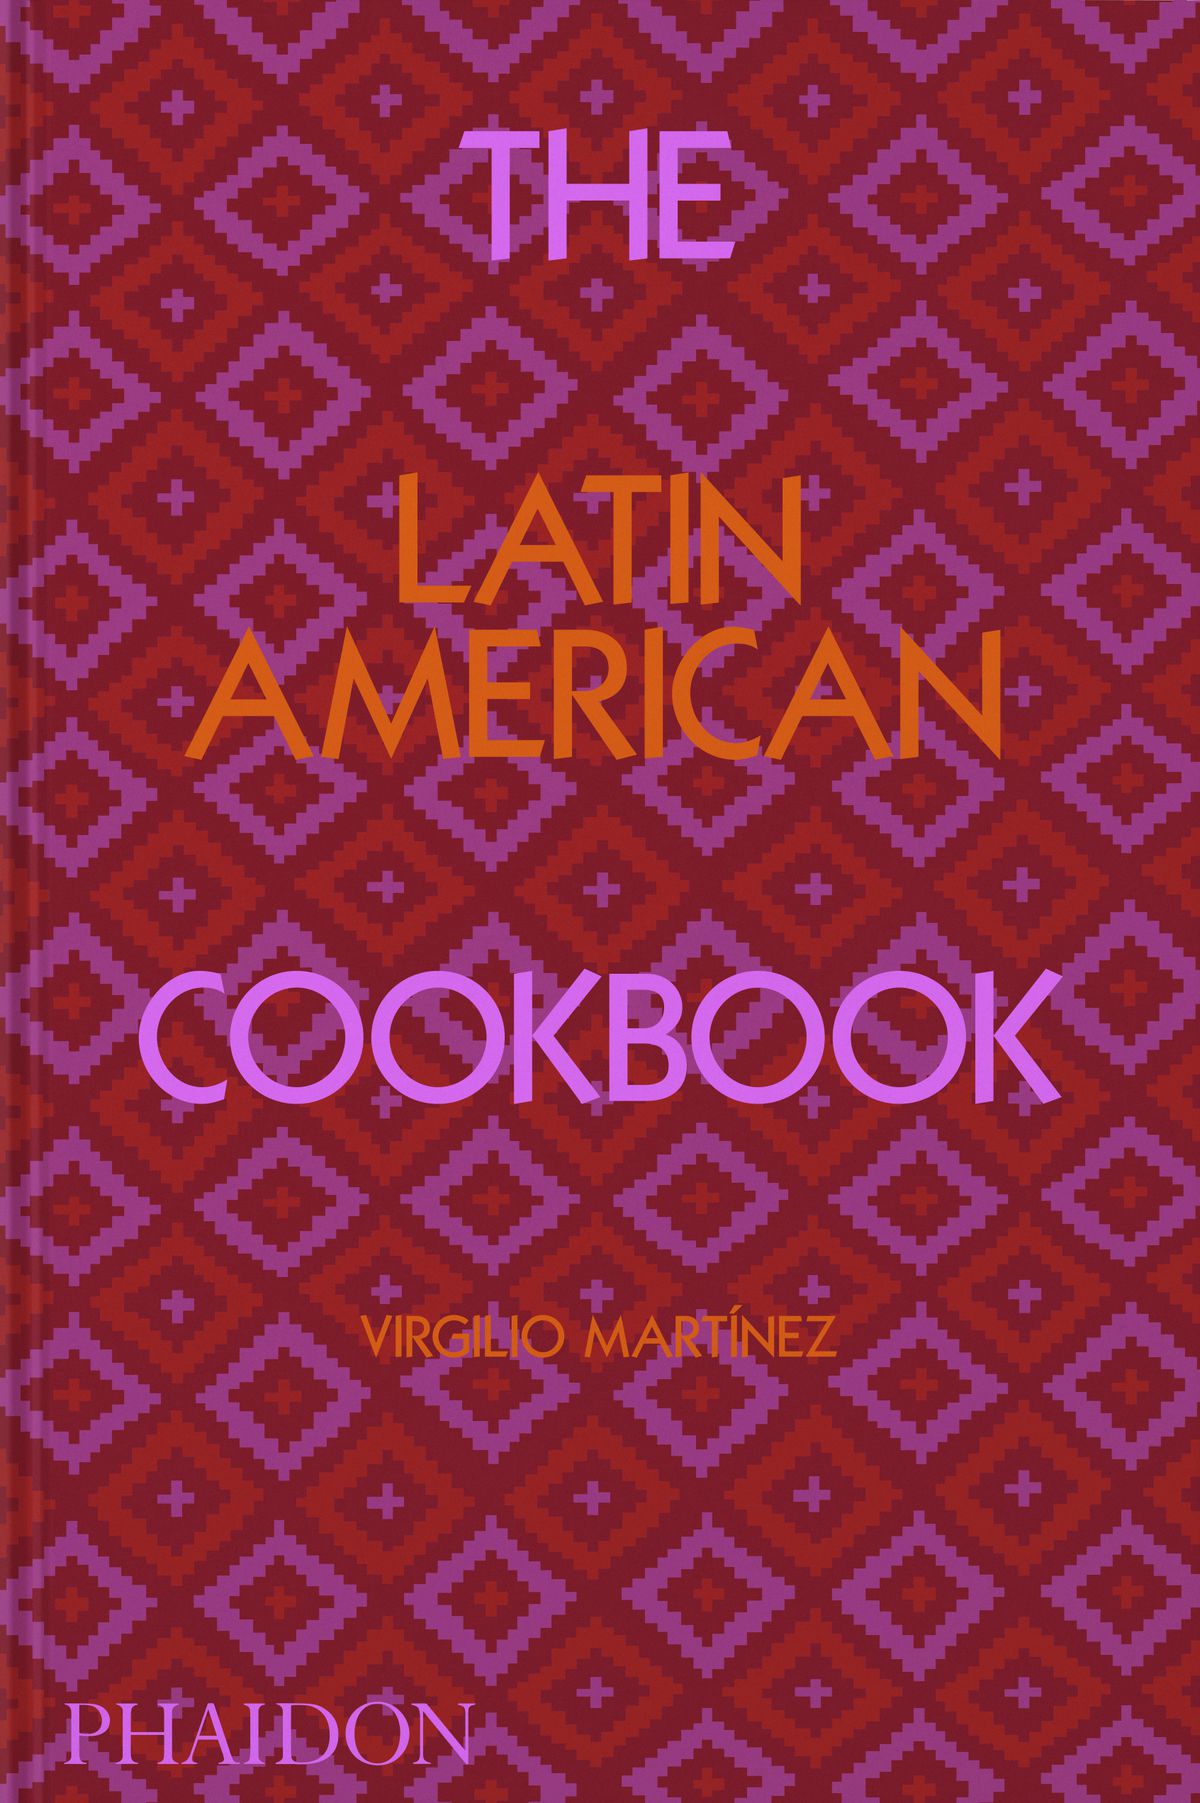 This cover image released by Phaidon shows the cover for “The Latin American Cookbook” by author and Michelin star-winning chef Virgilio Martinez.